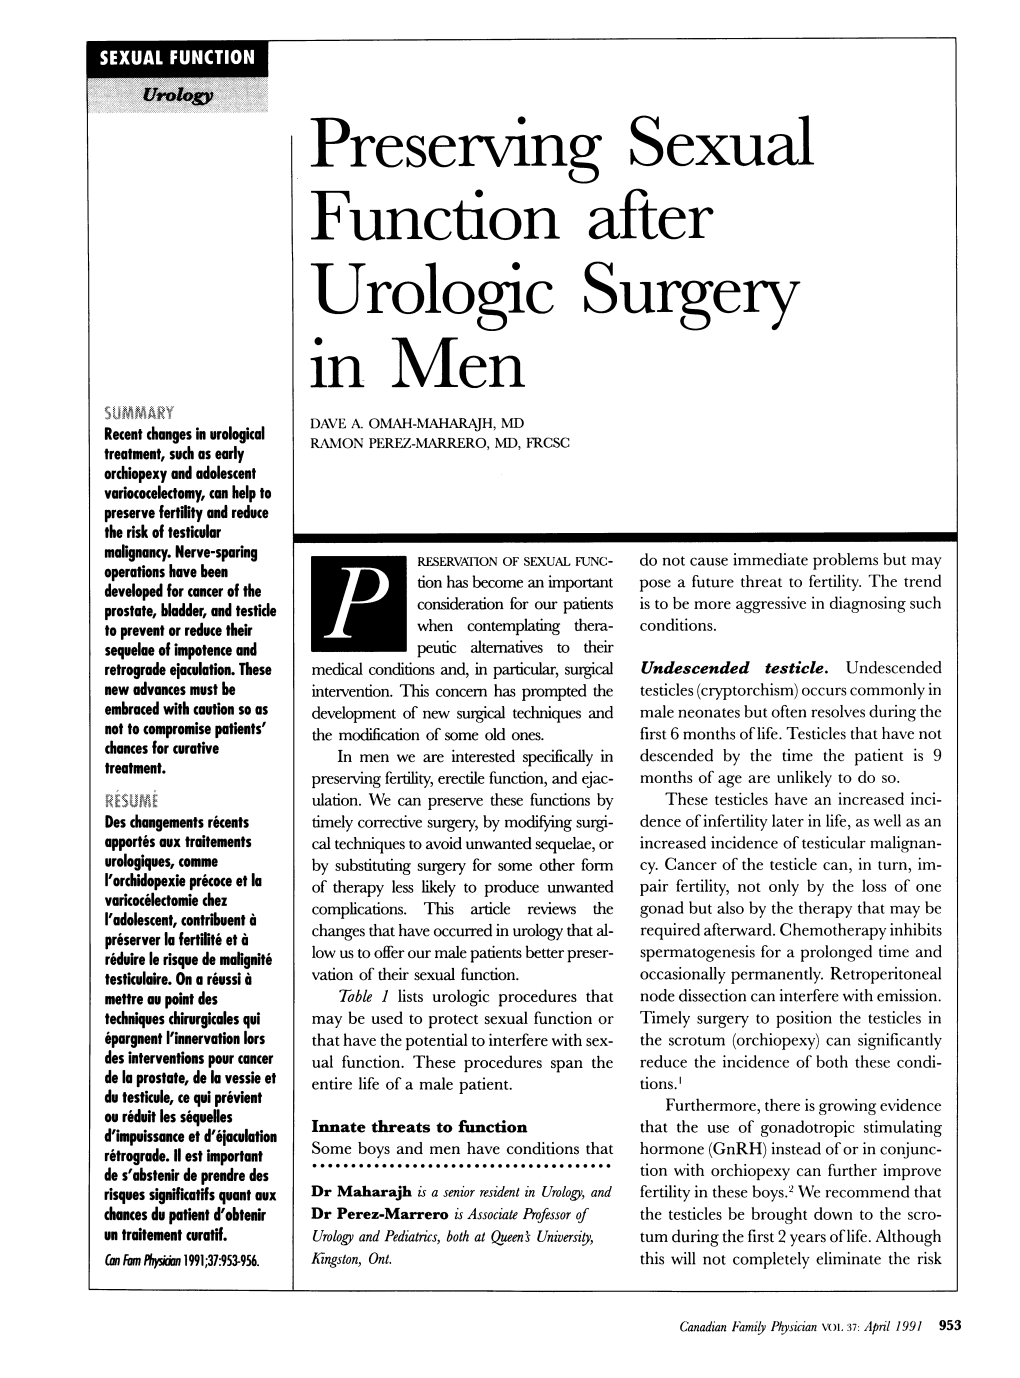 Preserving Sexual Function After Urologic Surgery Men SUPM Ase Ve Recent Changes in Urological DAVE A